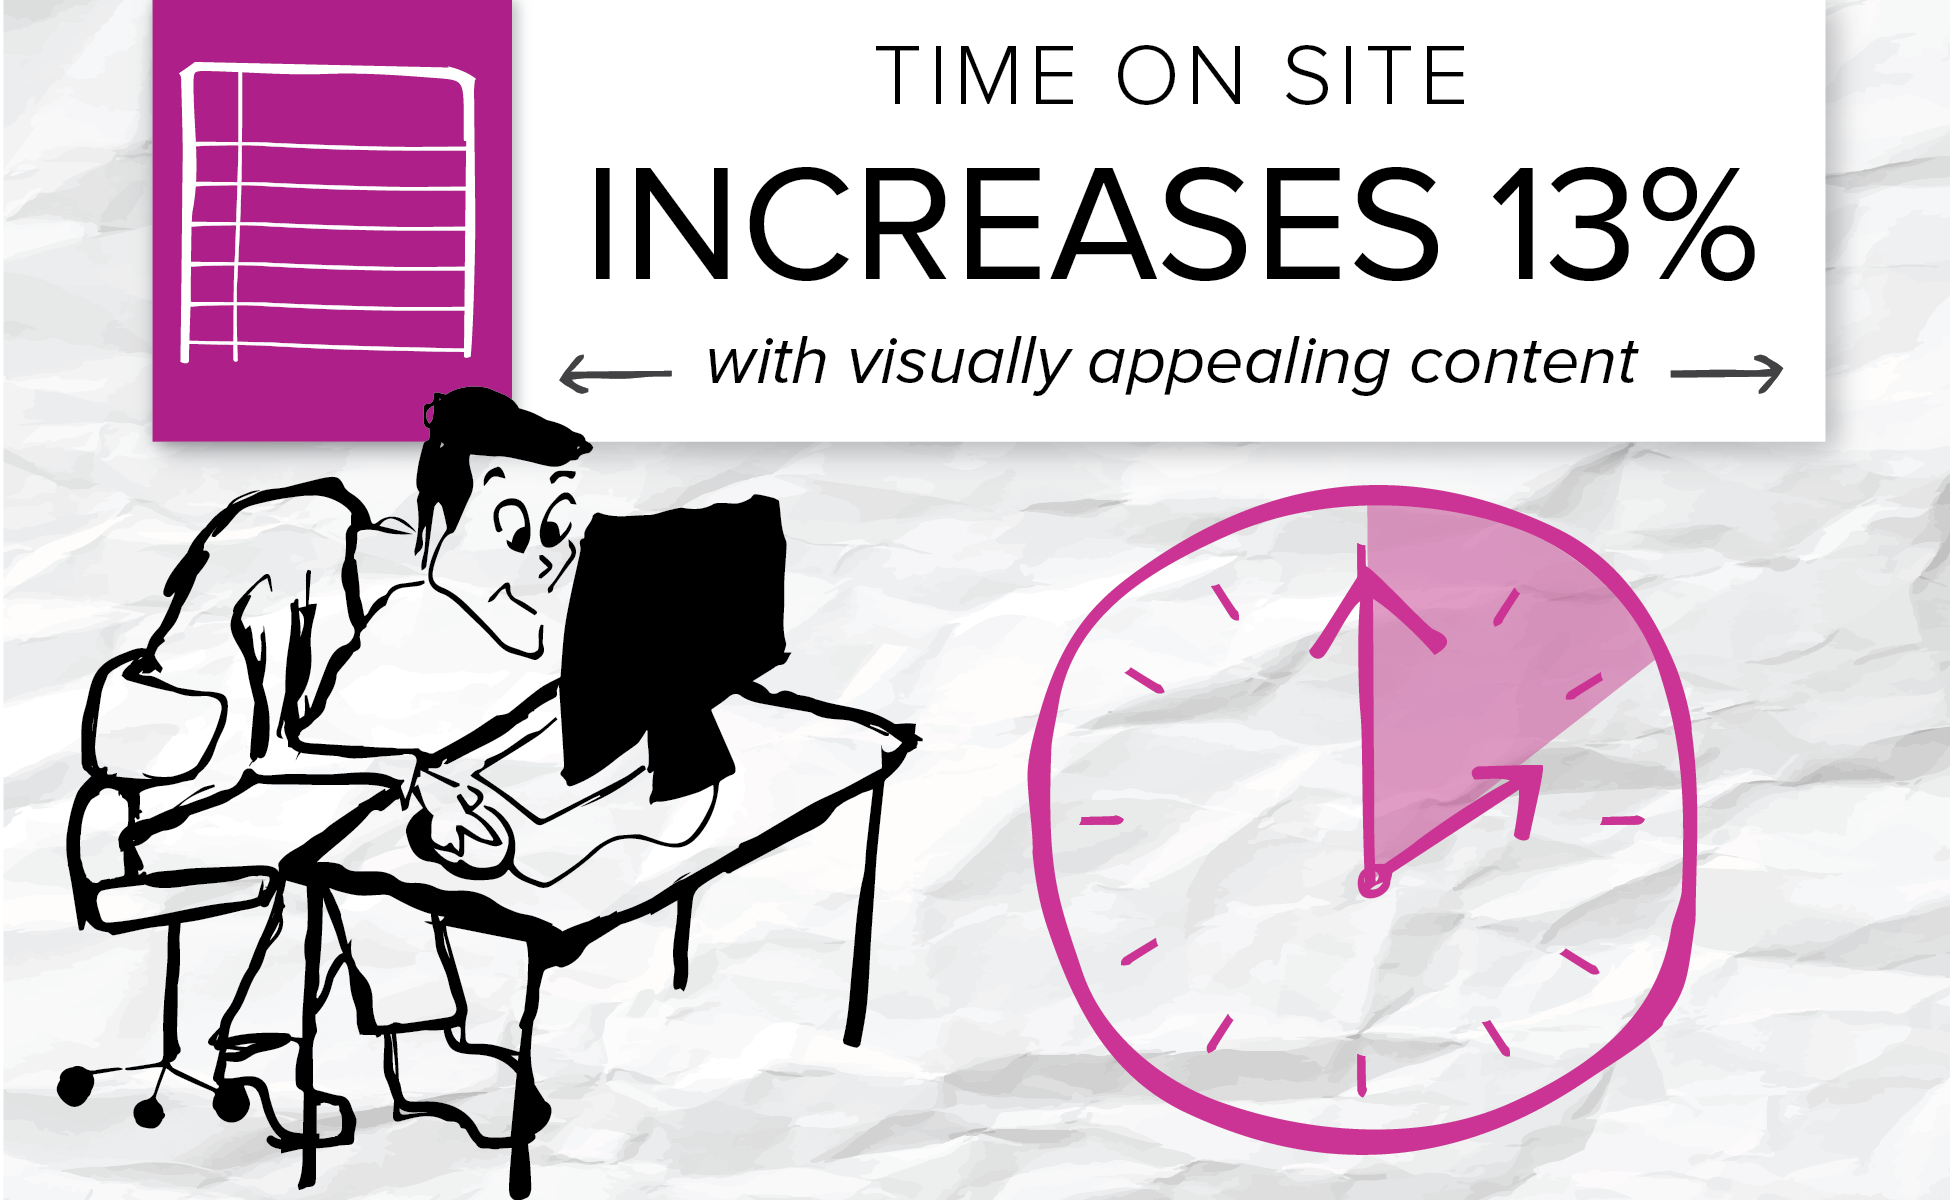 A visual upgrade helped a company increase its on-site engagement.